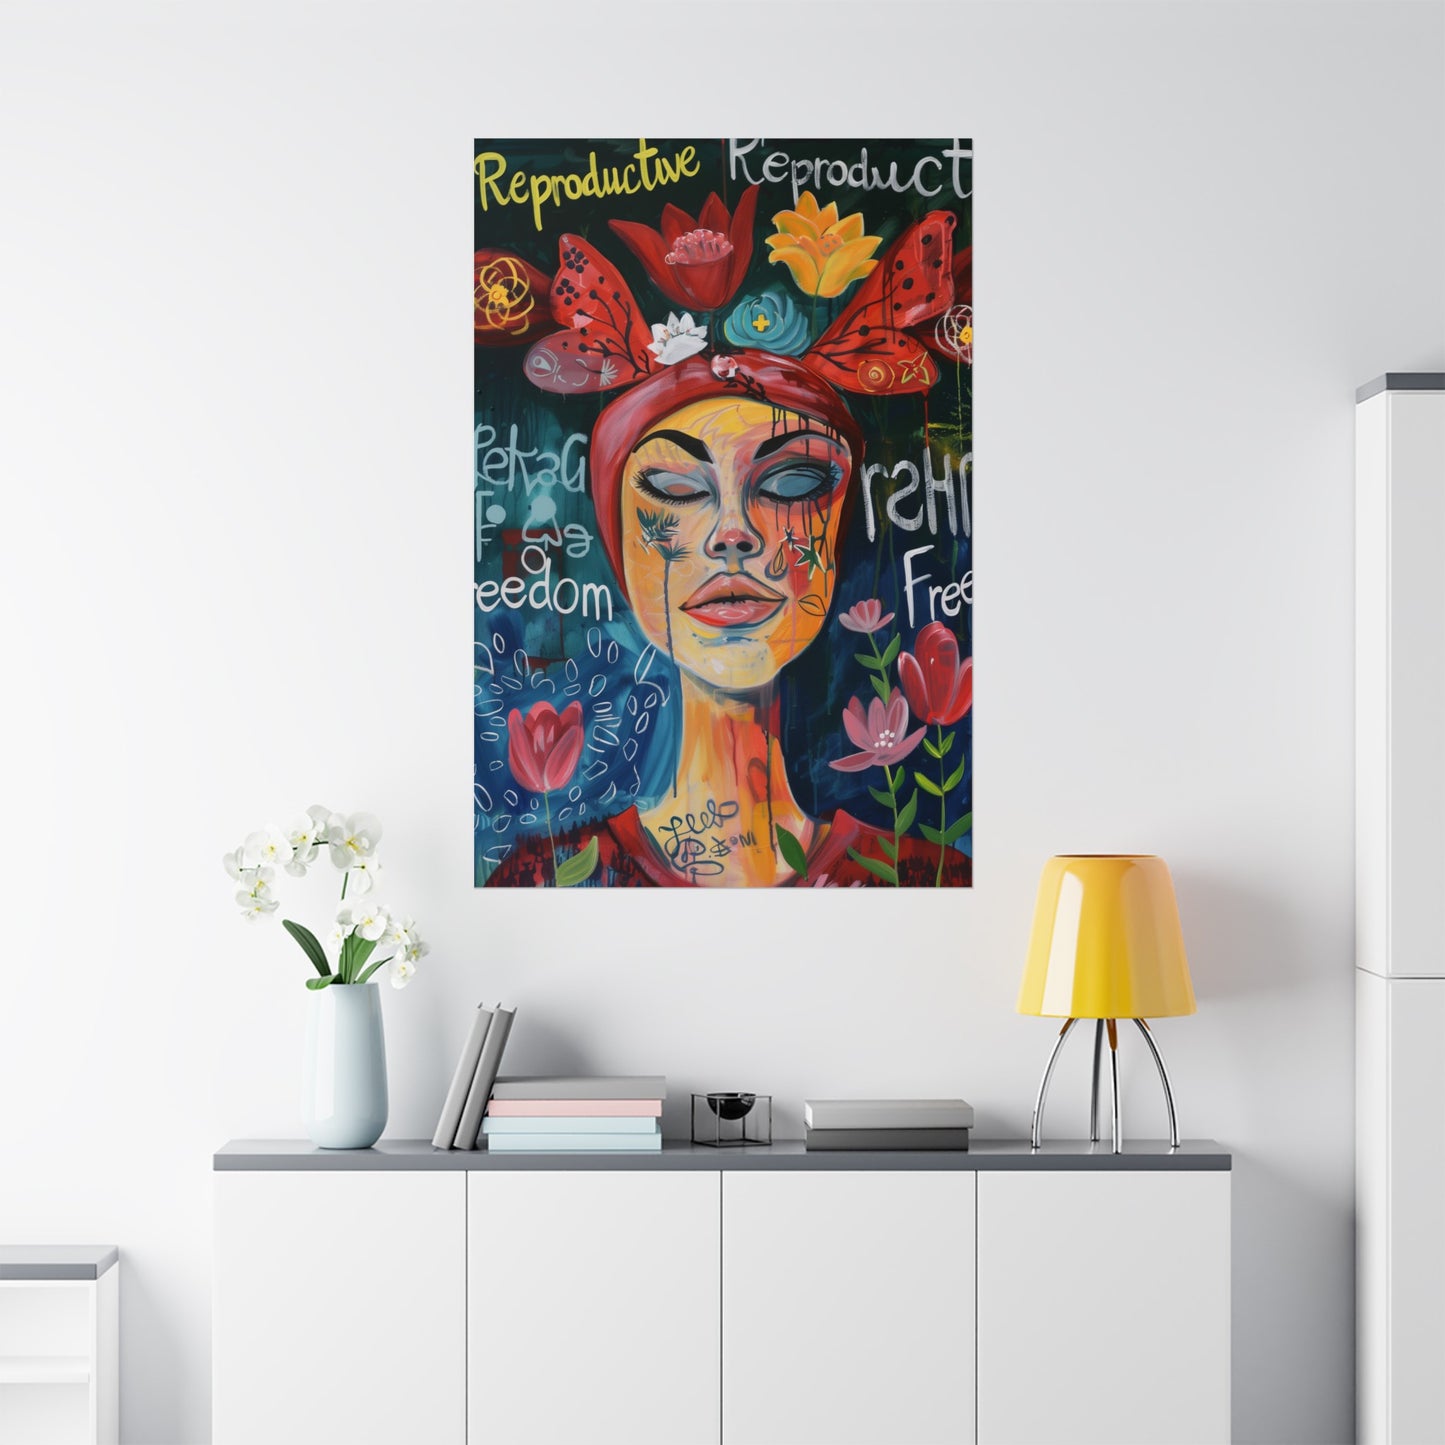 Reproductive Freedom Matte Poster Women's Rights Political Wall Art for Home Office Dorm Decor